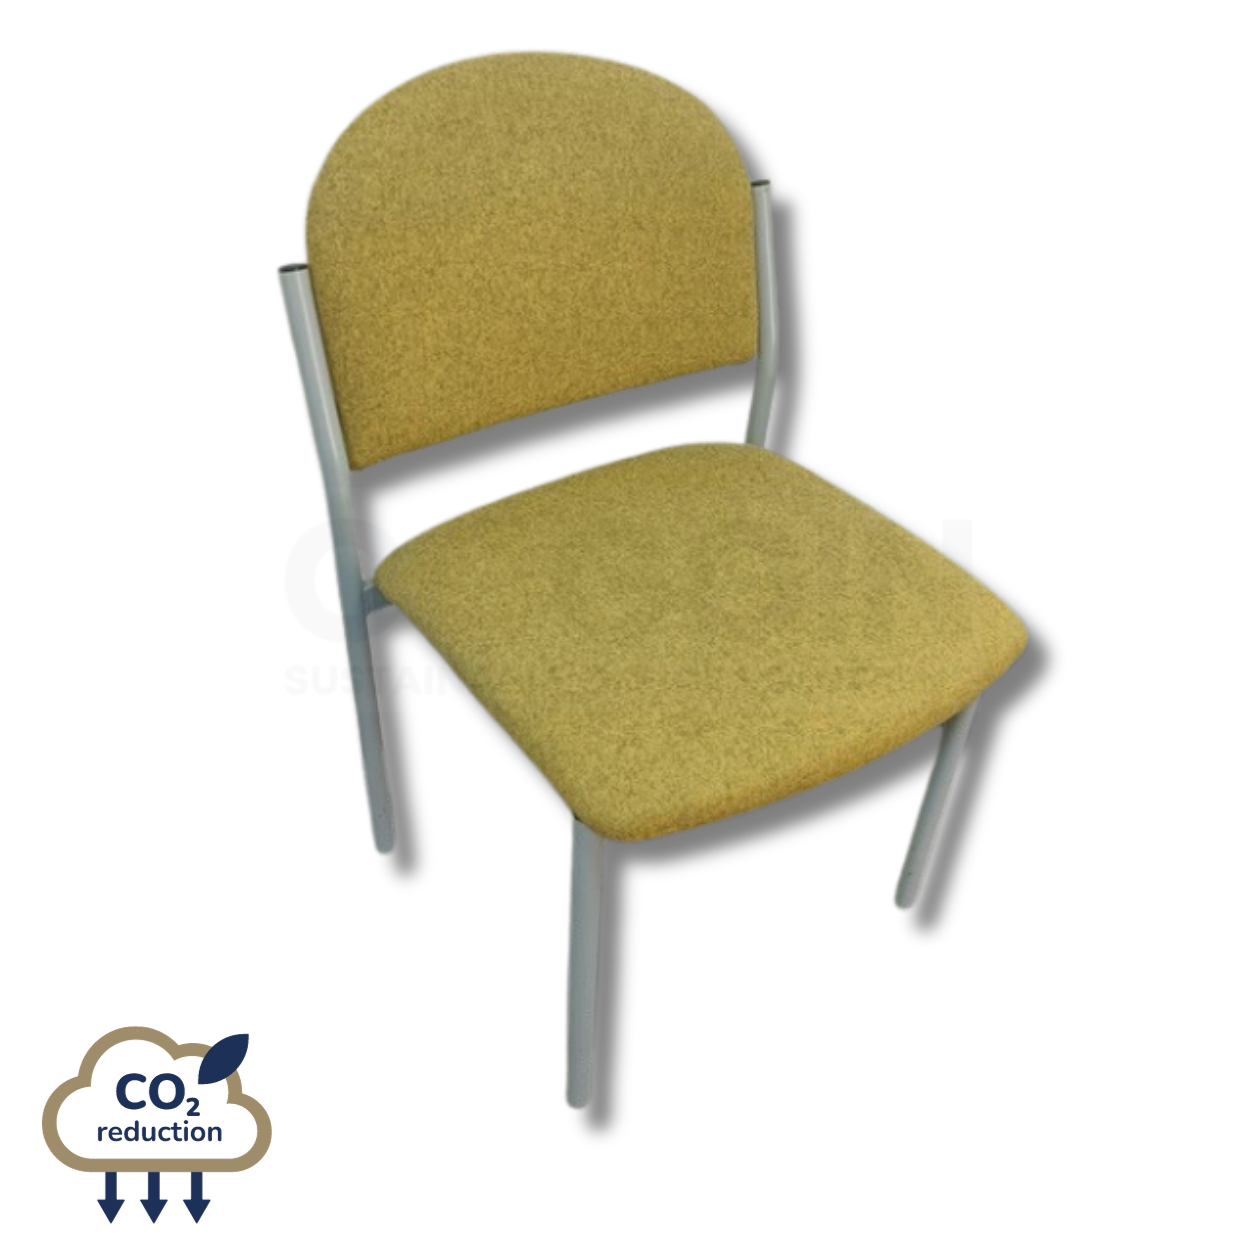 Heavy Duty Stacking Chairs - Mustard Fabric - Silver Frame